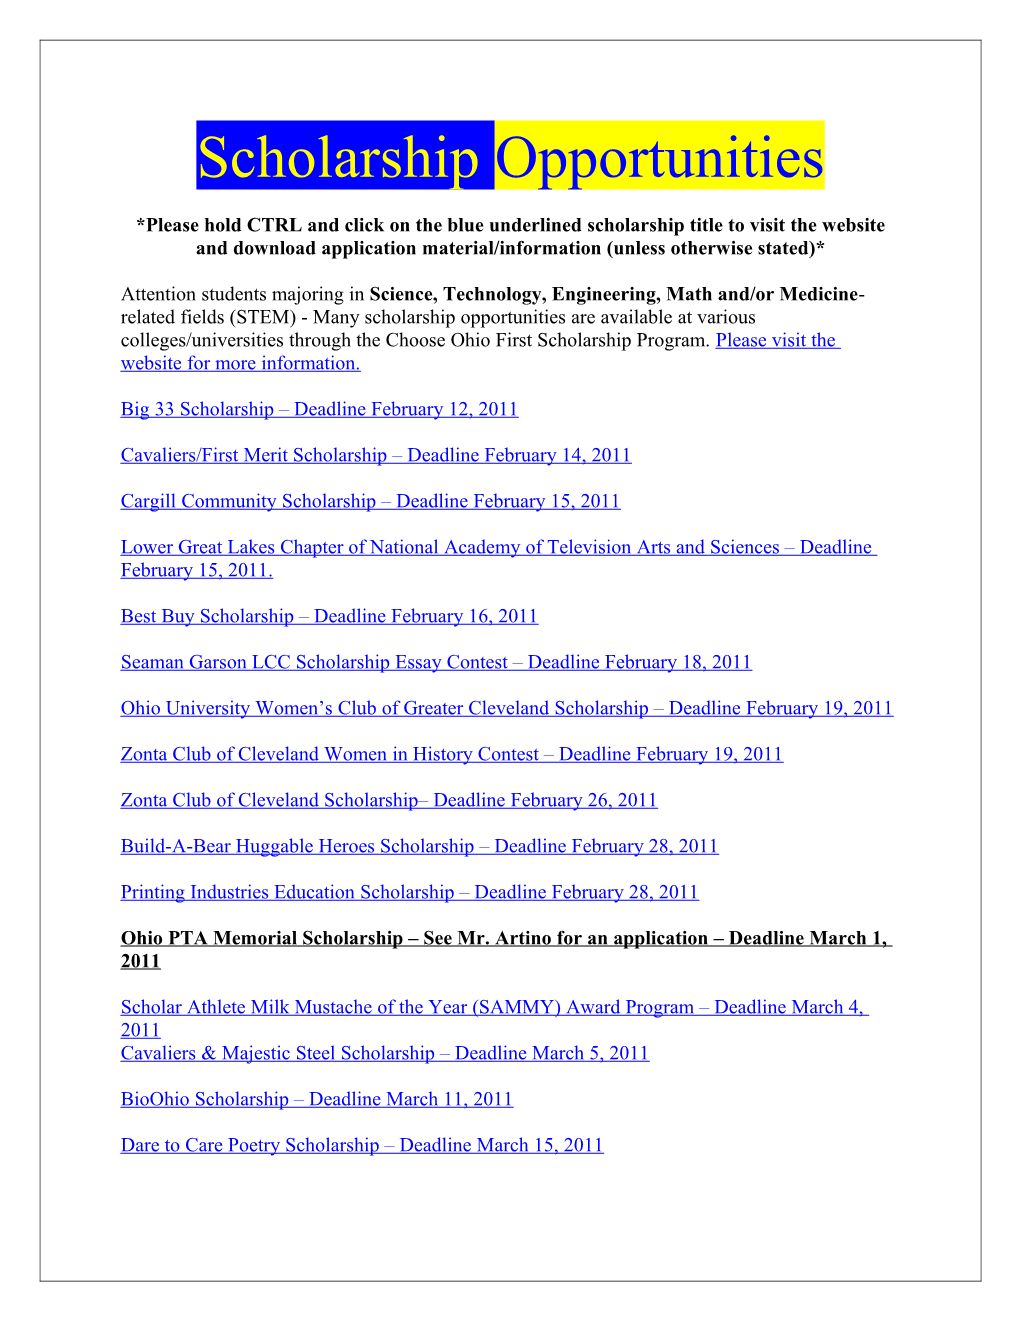 No Scholarship Opportunities Are Currently Available